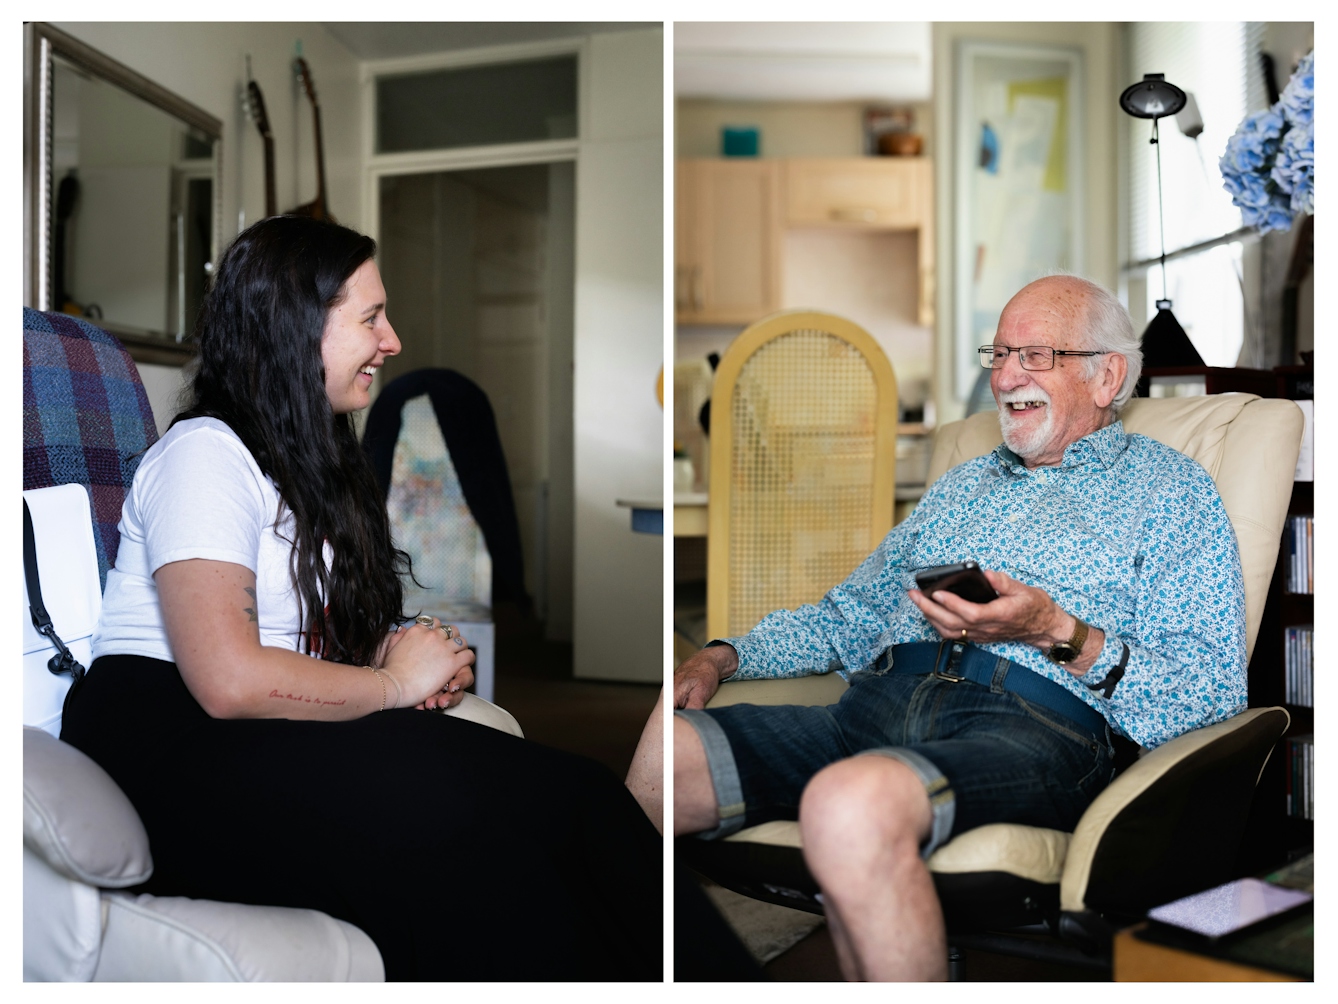 Two photographs next to each other forming a diptych of two people in a living room, sat on armchairs they are facing each and smiling. On the left is a young woman with long dark hair. She is wearing a white t-shirt and a long dark skirt. On the right is an elderly man wearing glasses with white hair and a white goatee beard. The man is holding a mobile phone.